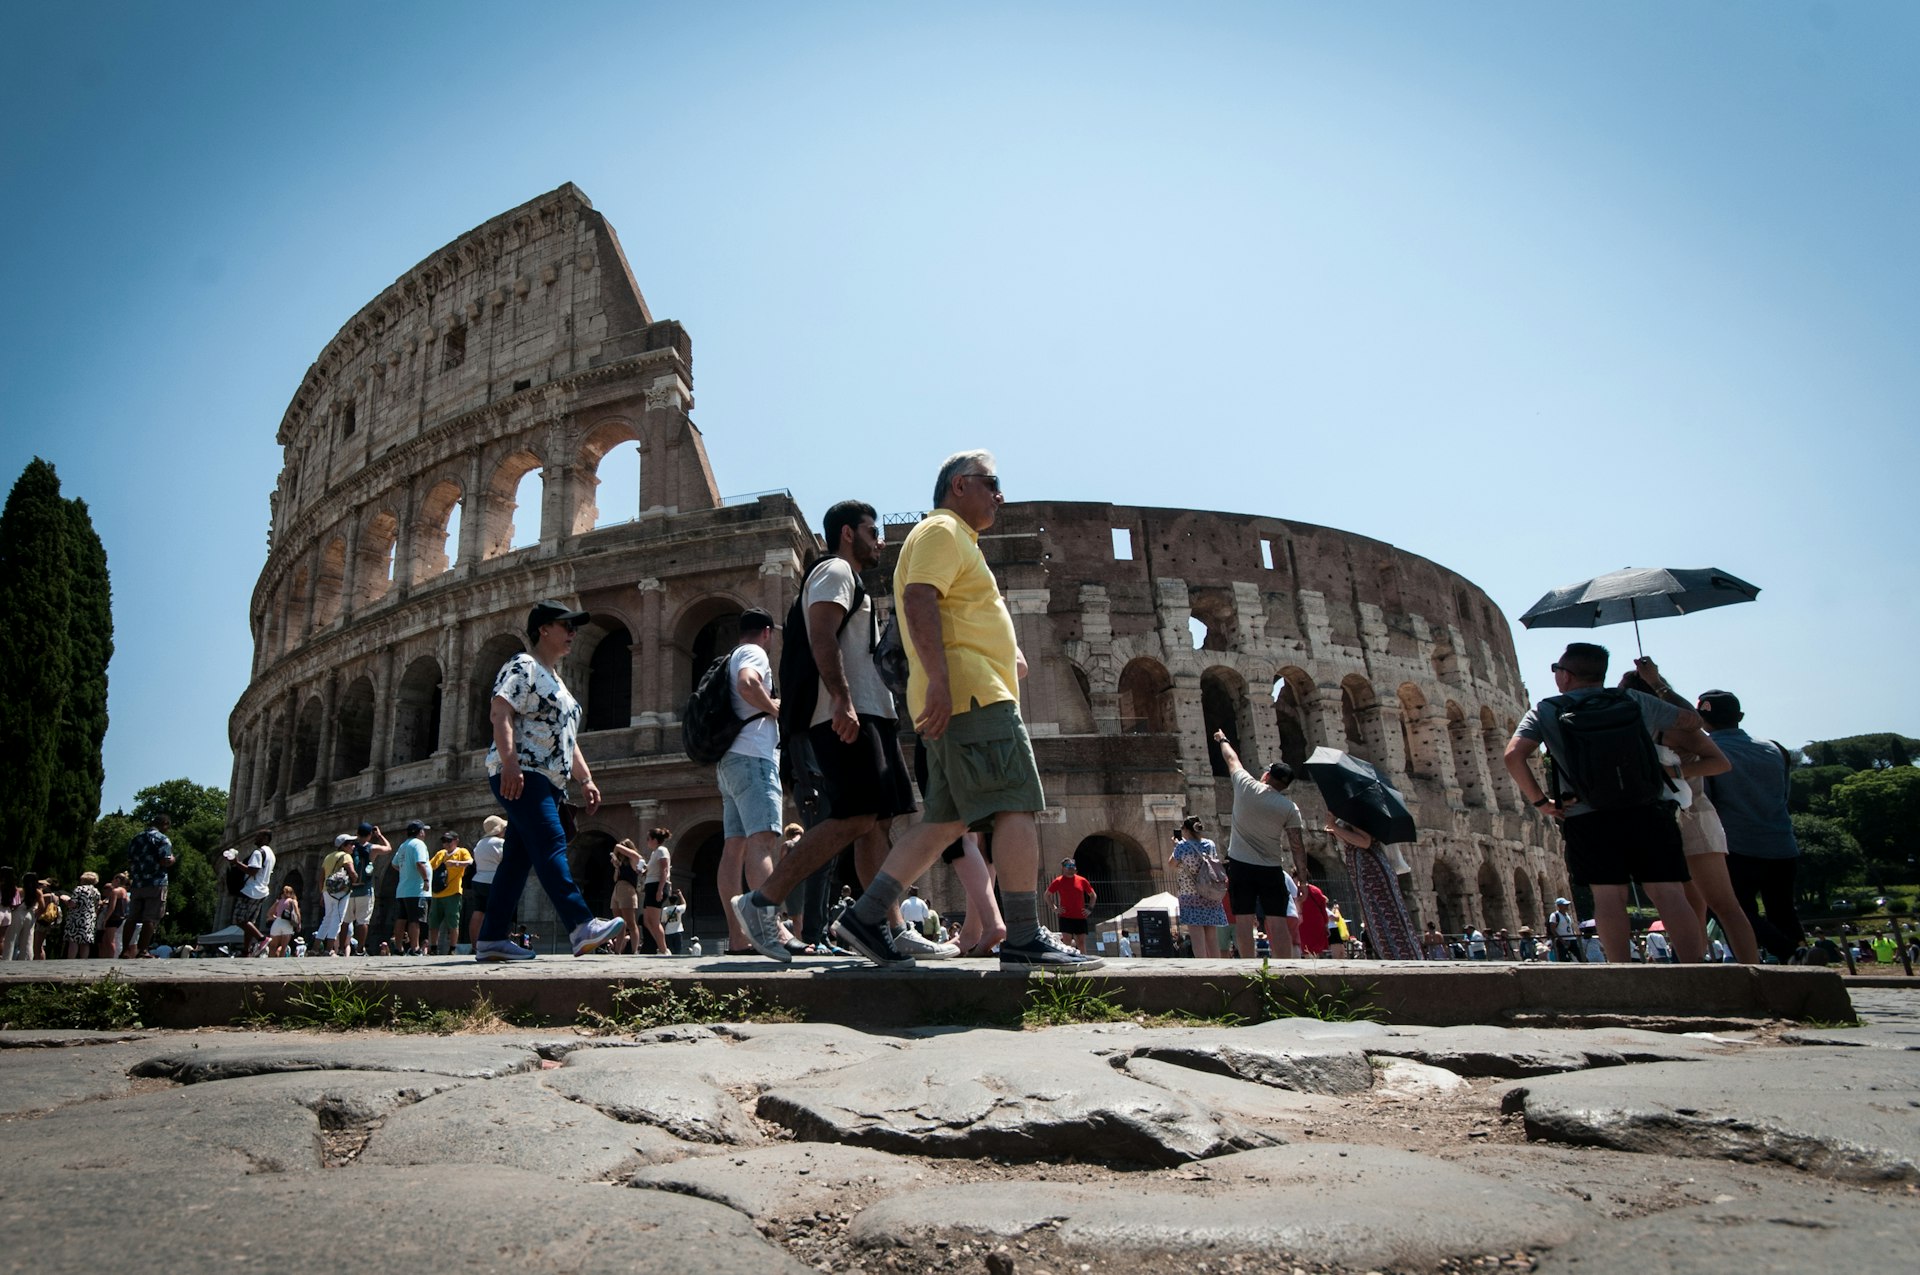 View of the Colosseum on a summer's day - things not to do in Italy